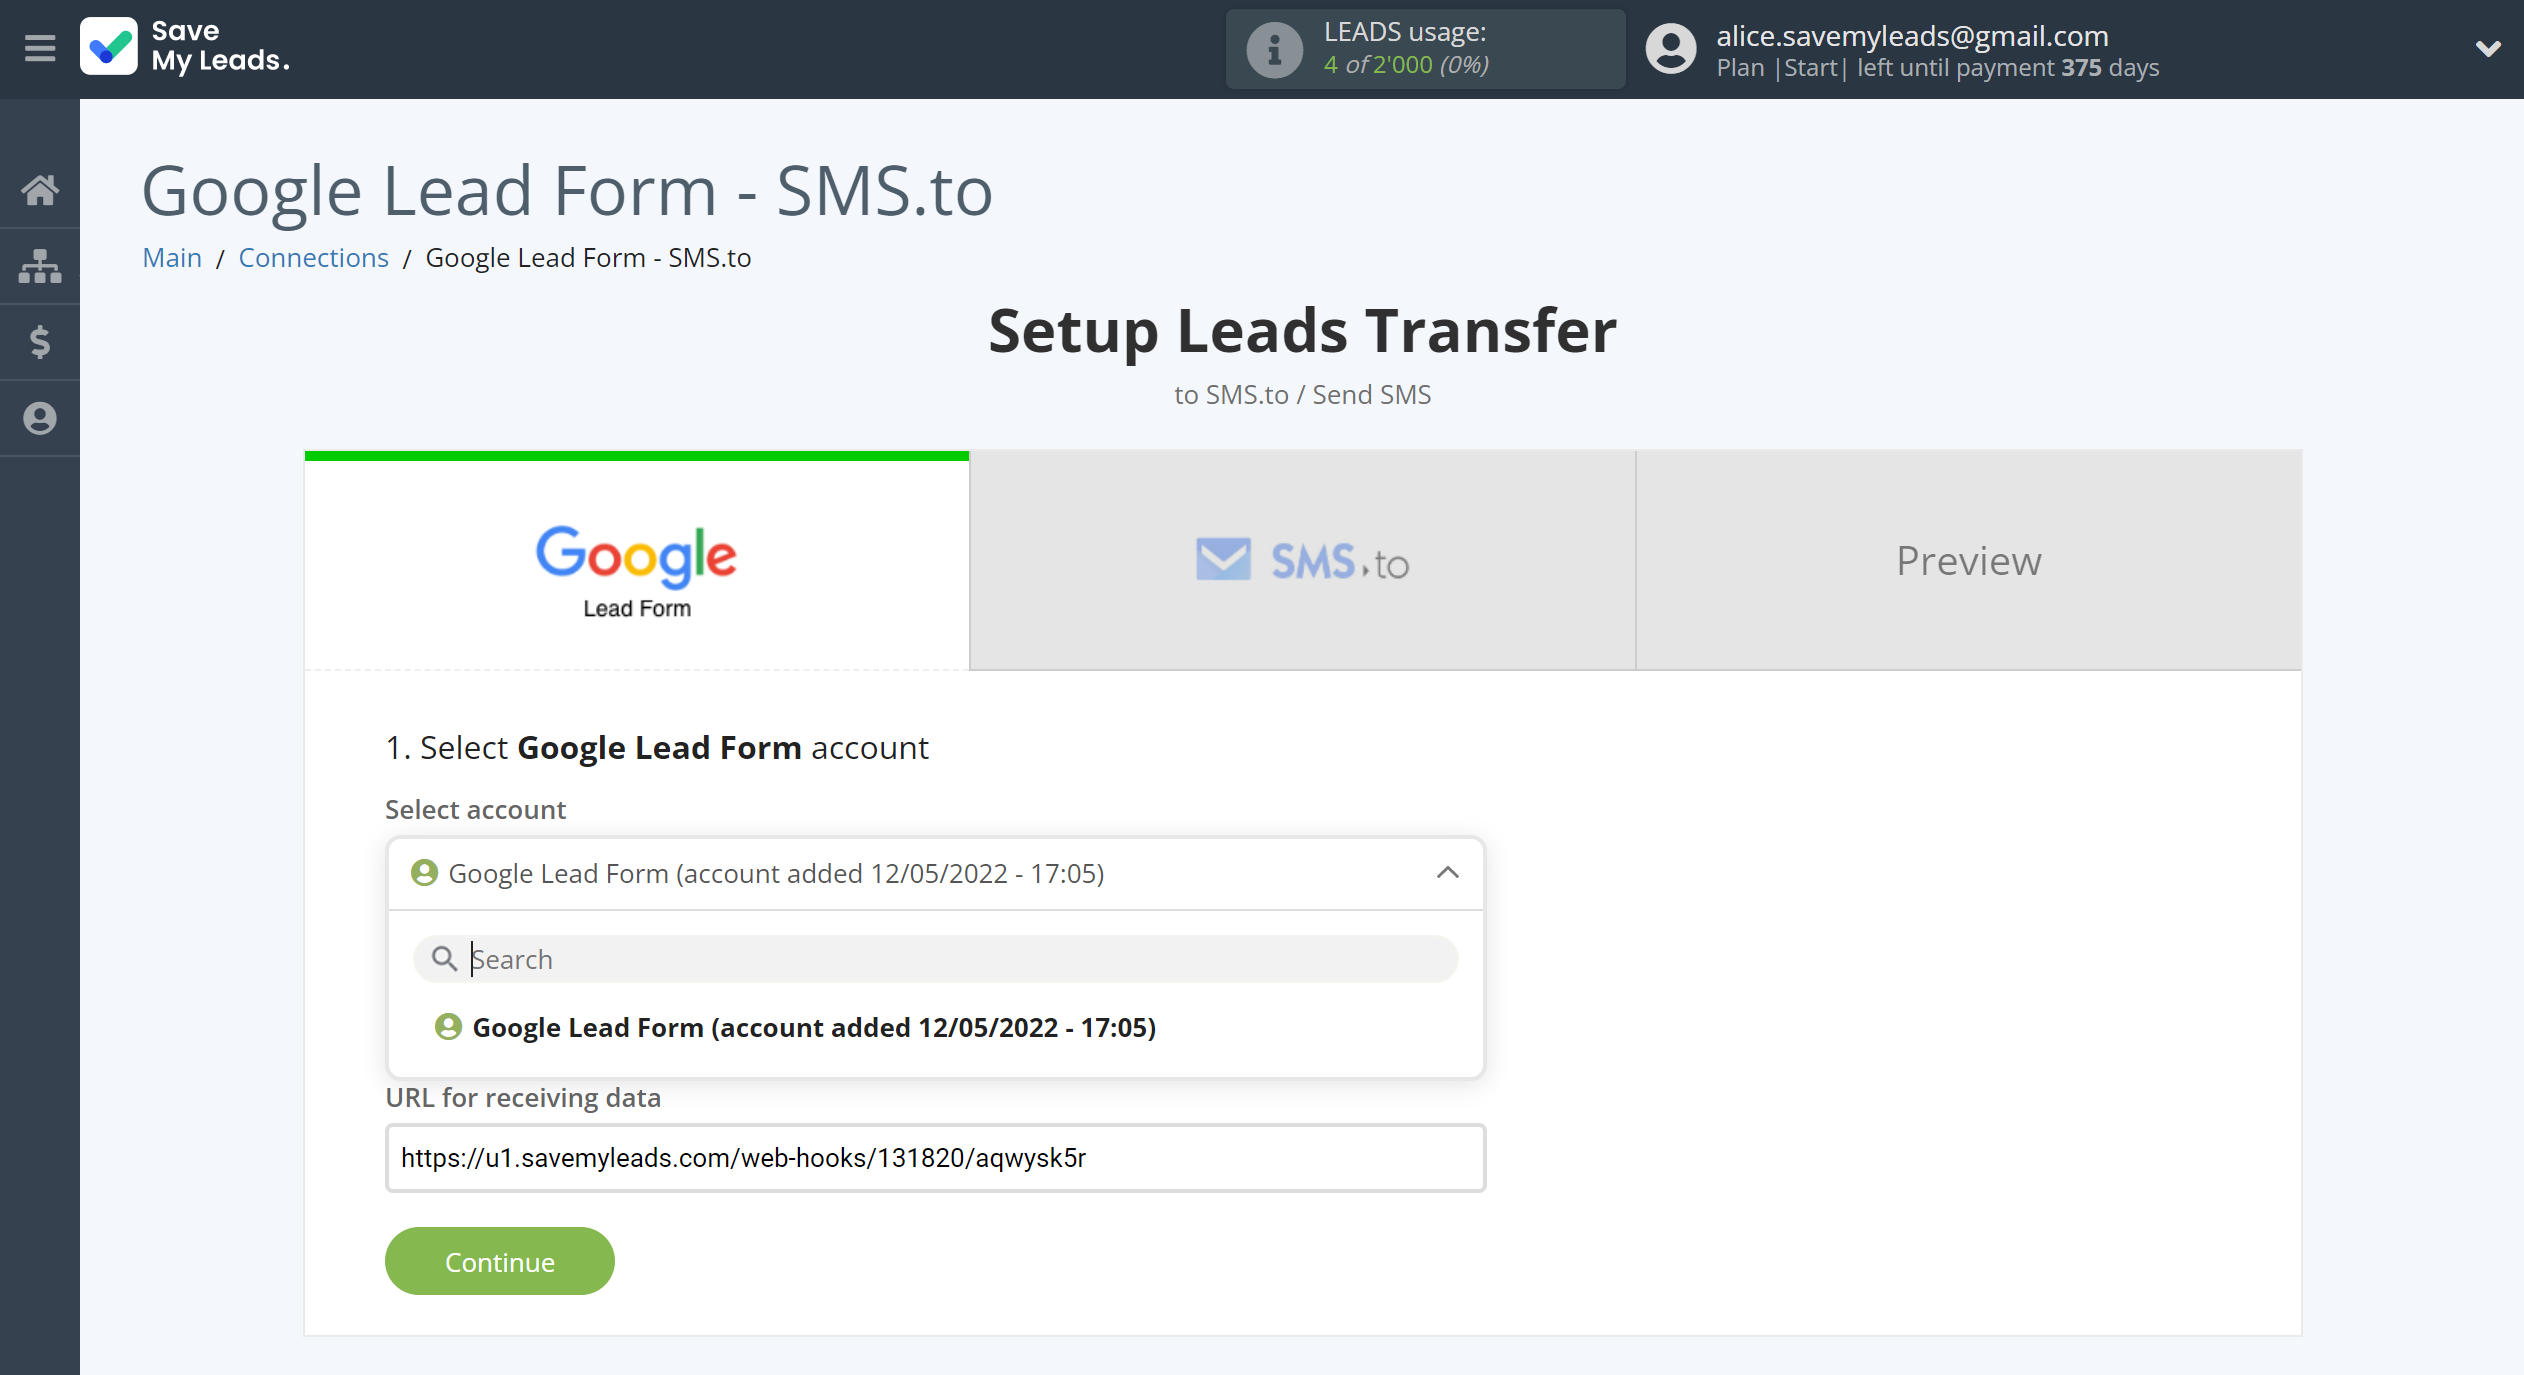 How to Connect Google Lead Form with SMS.to | Data Source account selection